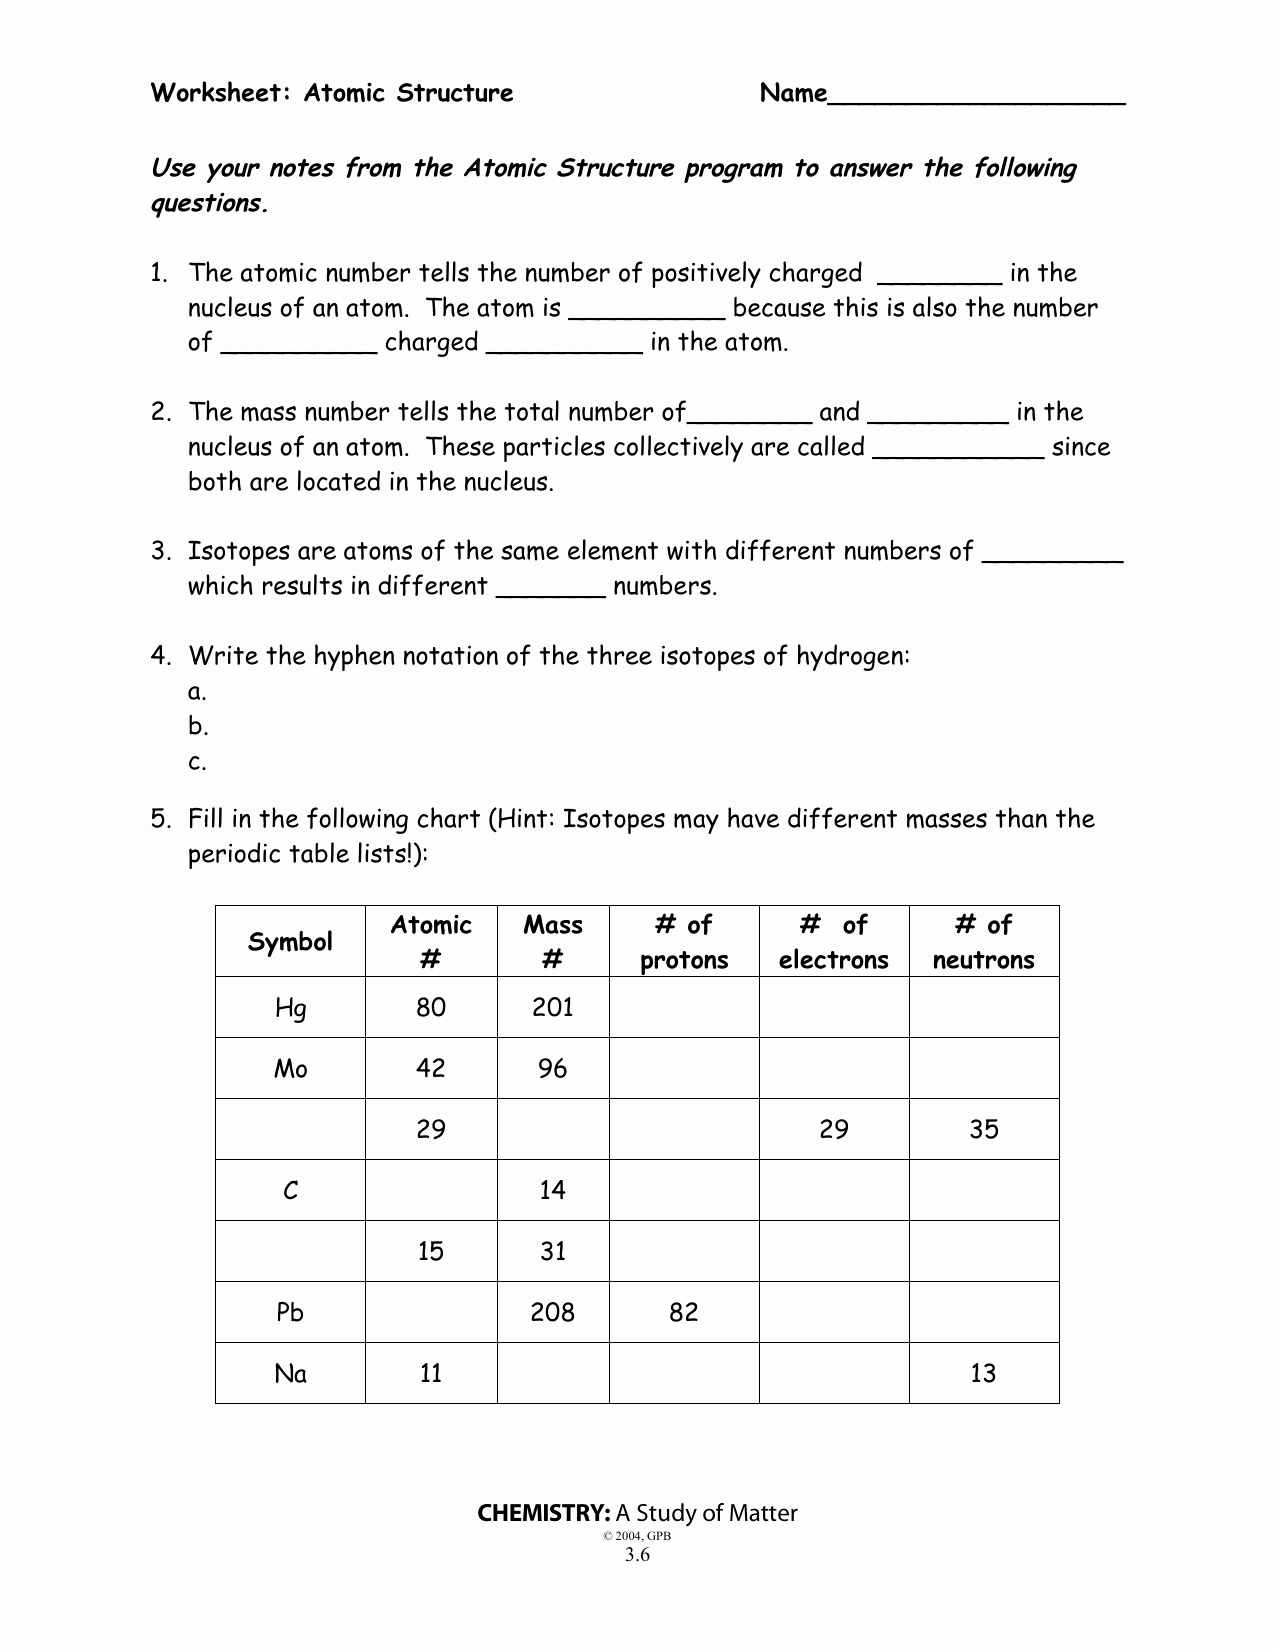 Composition Of Matter Worksheet Inspirational Worksheet atomic Structure Answers Chemistry A Study